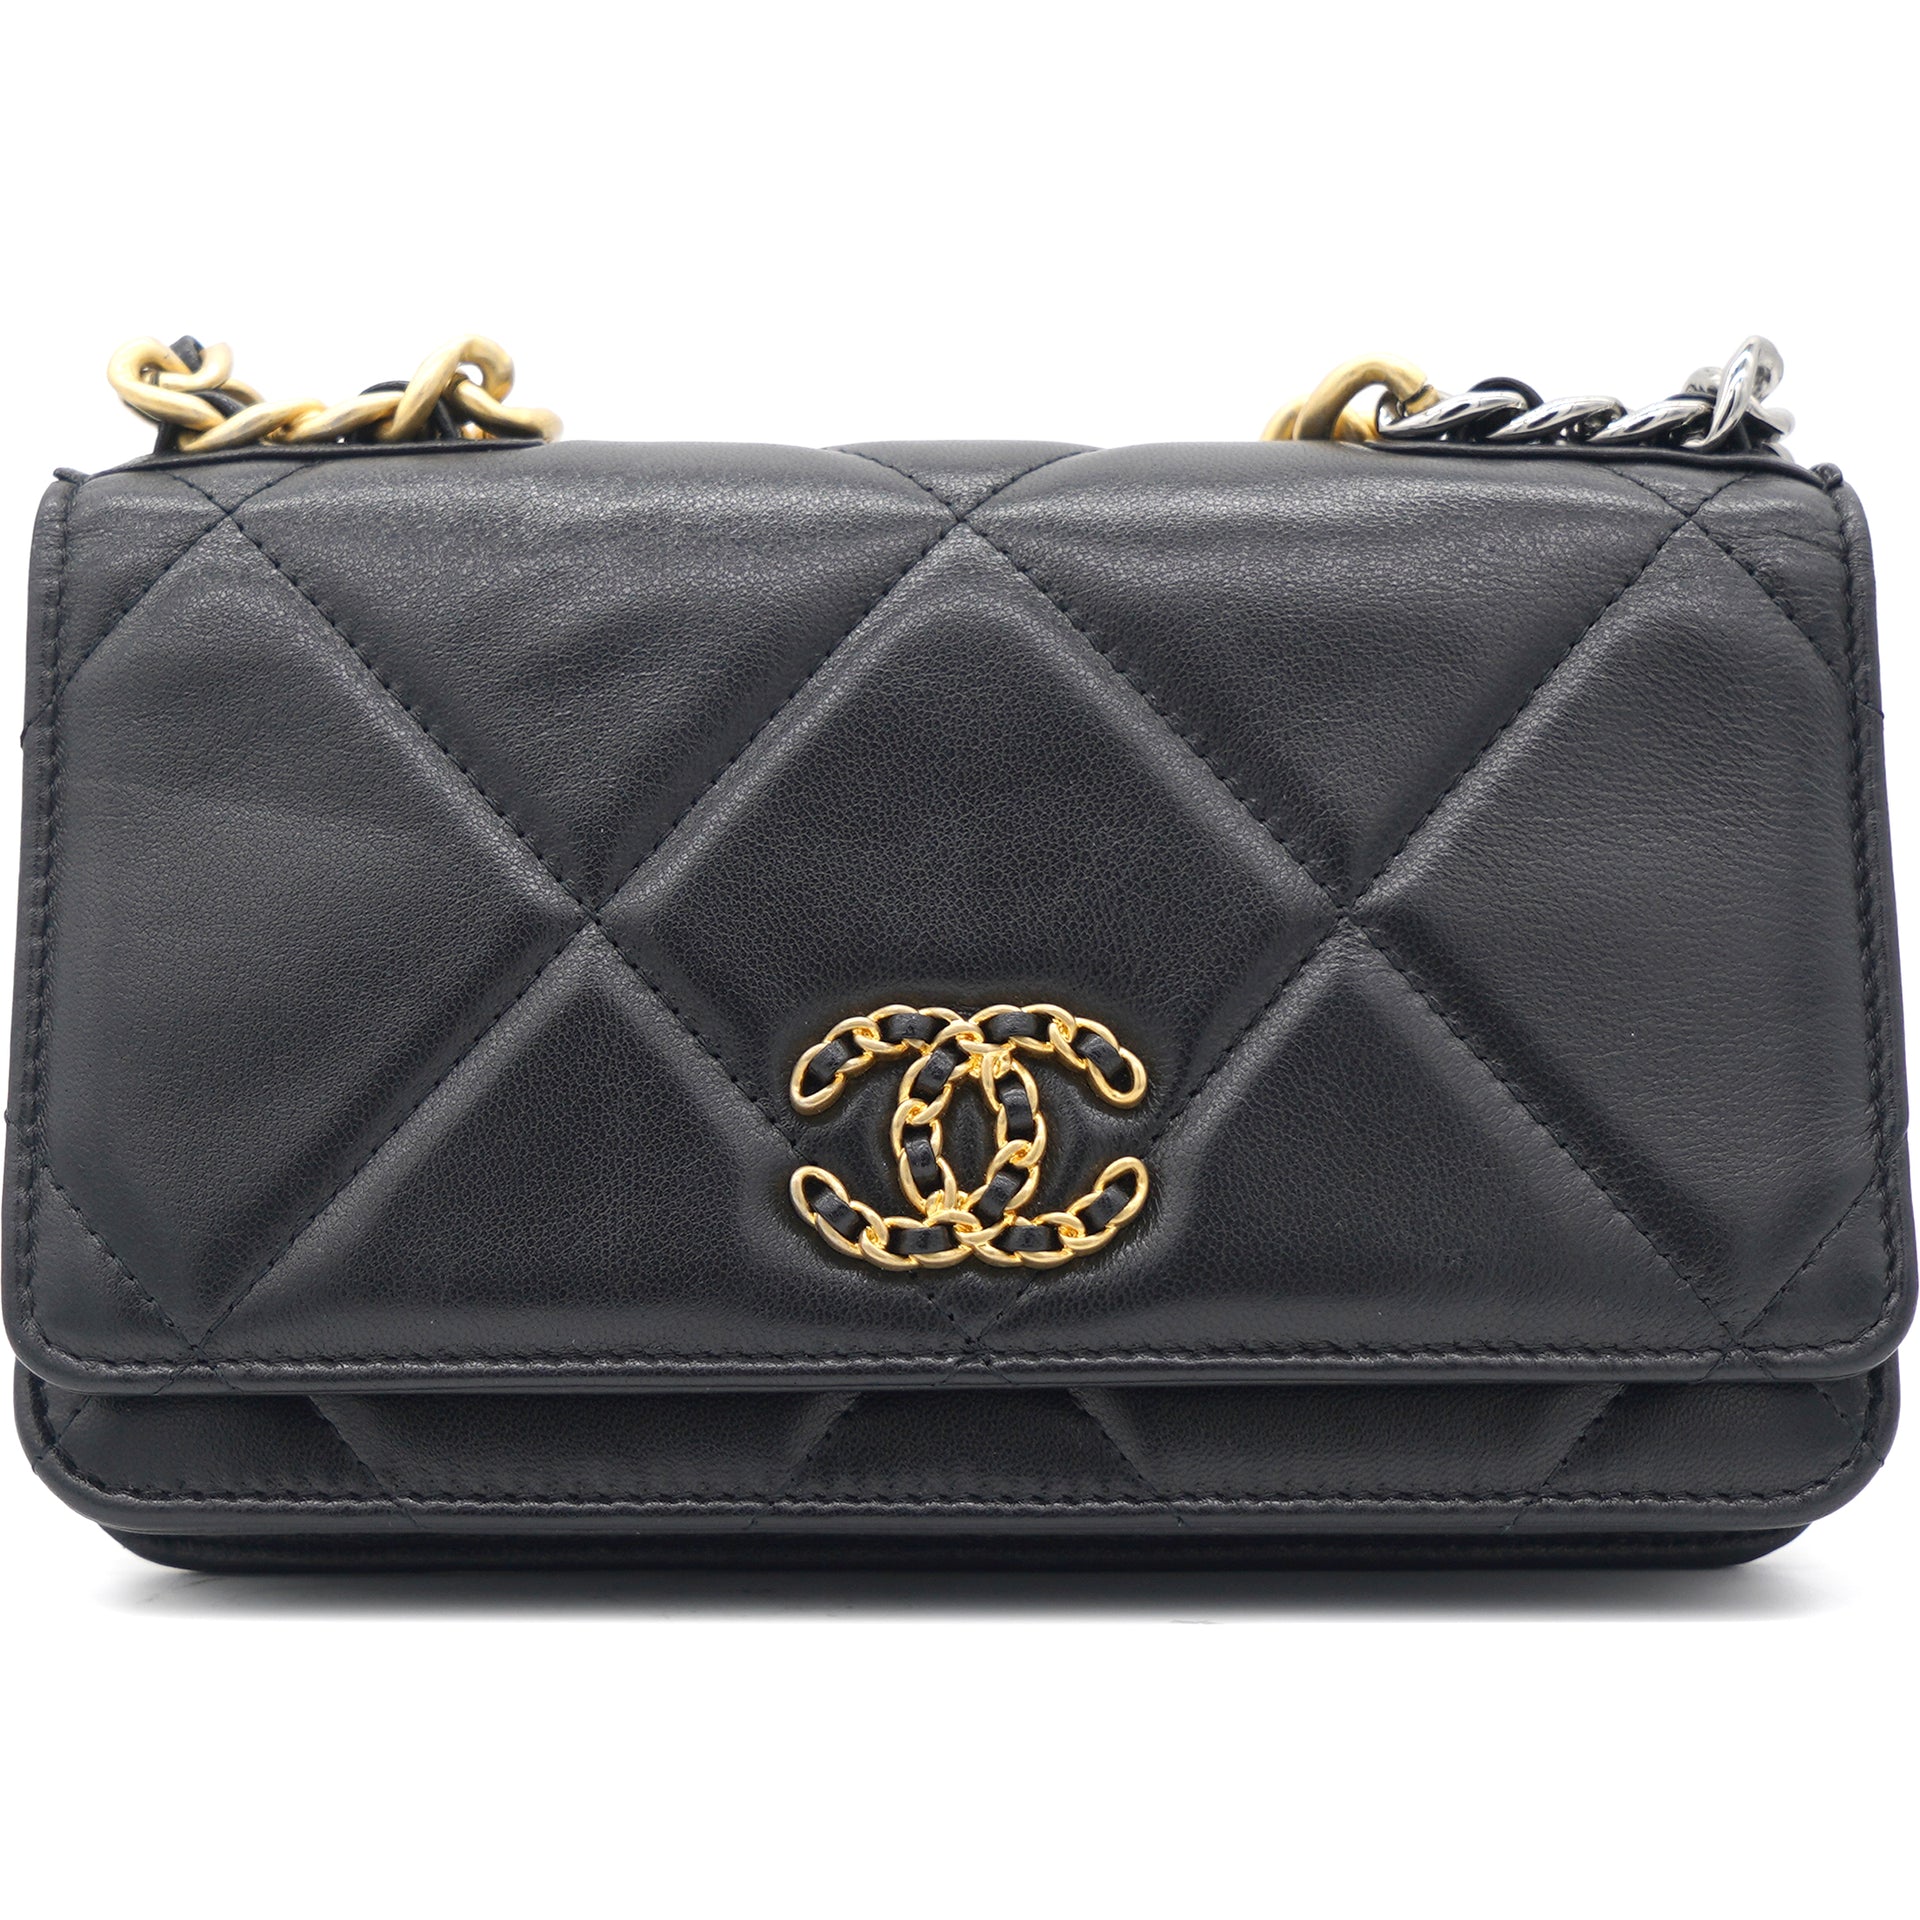 Chanel Black Quilted Lambskin CC Hobo Bag Aged Gold Hardware, 2021